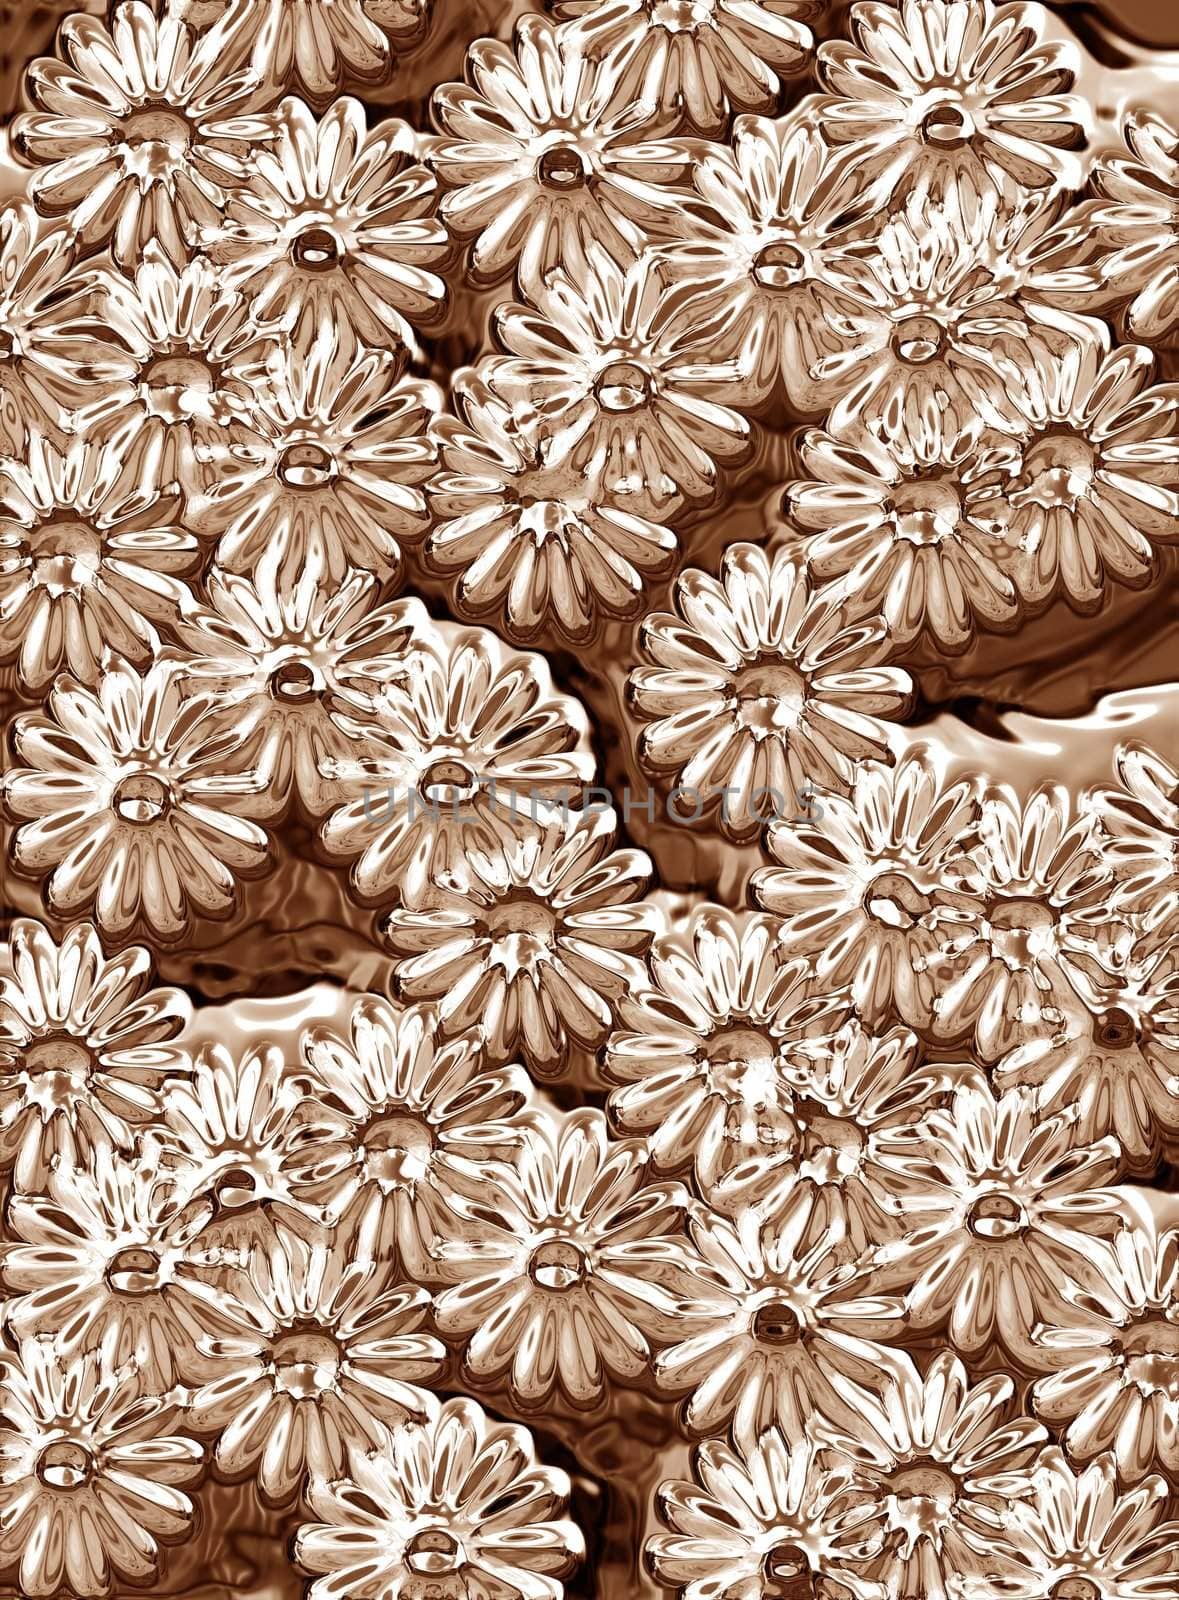 sepia brown 3d texture of abstract grunge flower shapes